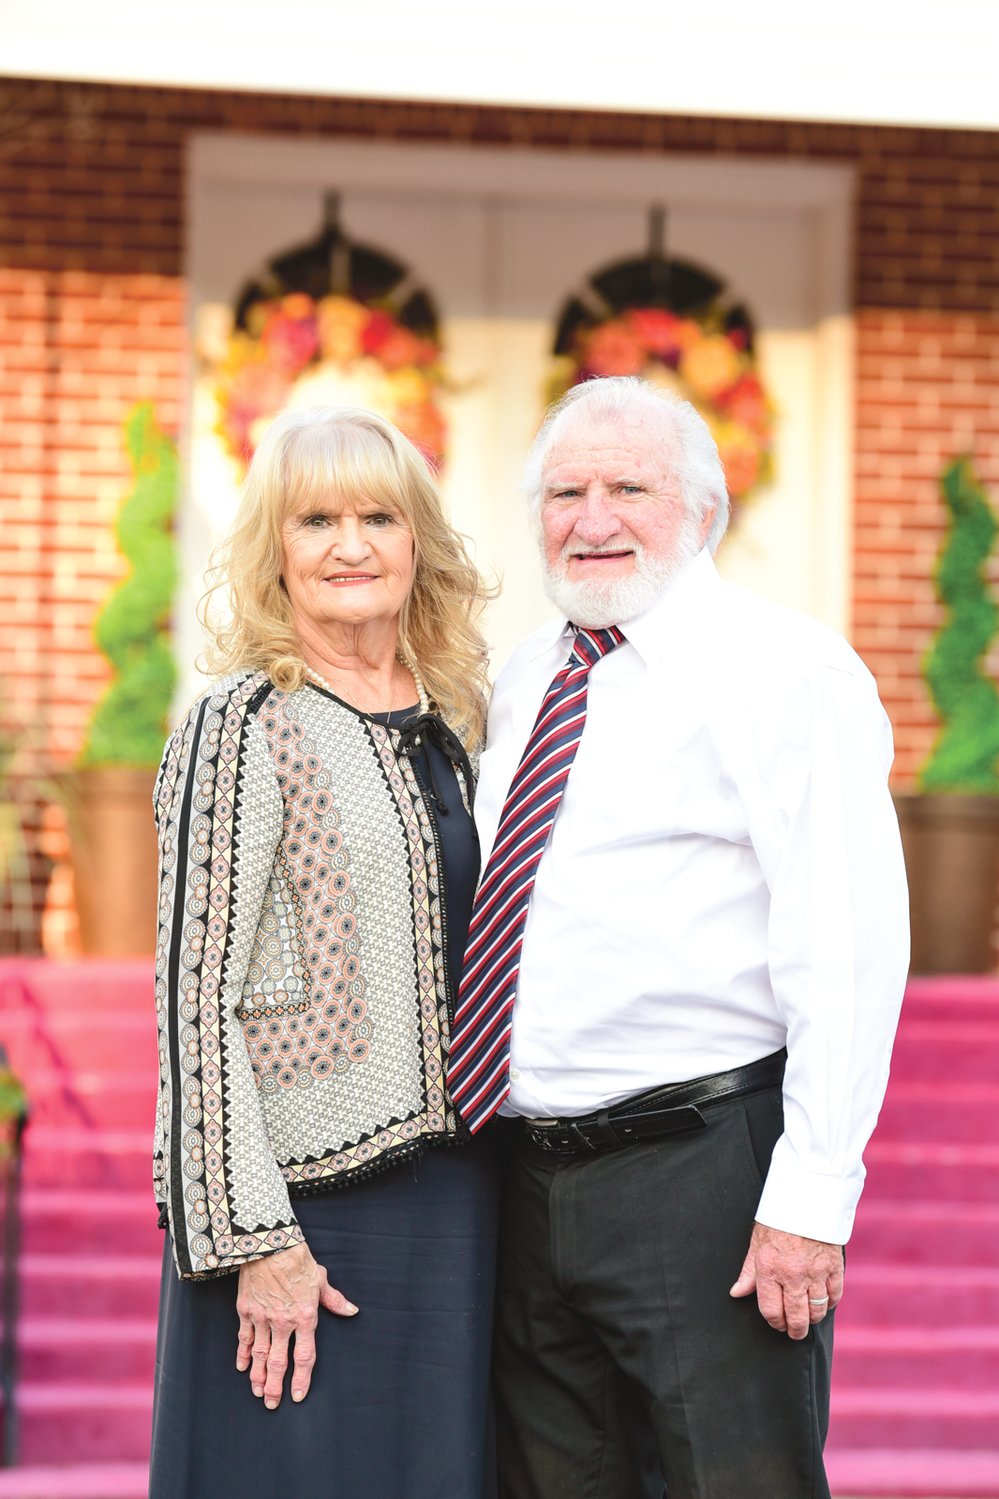 Pastors Darrell and Martha Stafford lead New Life Church in Iuka and invite everyone to come out and worship with them during their camp meeting this fall.